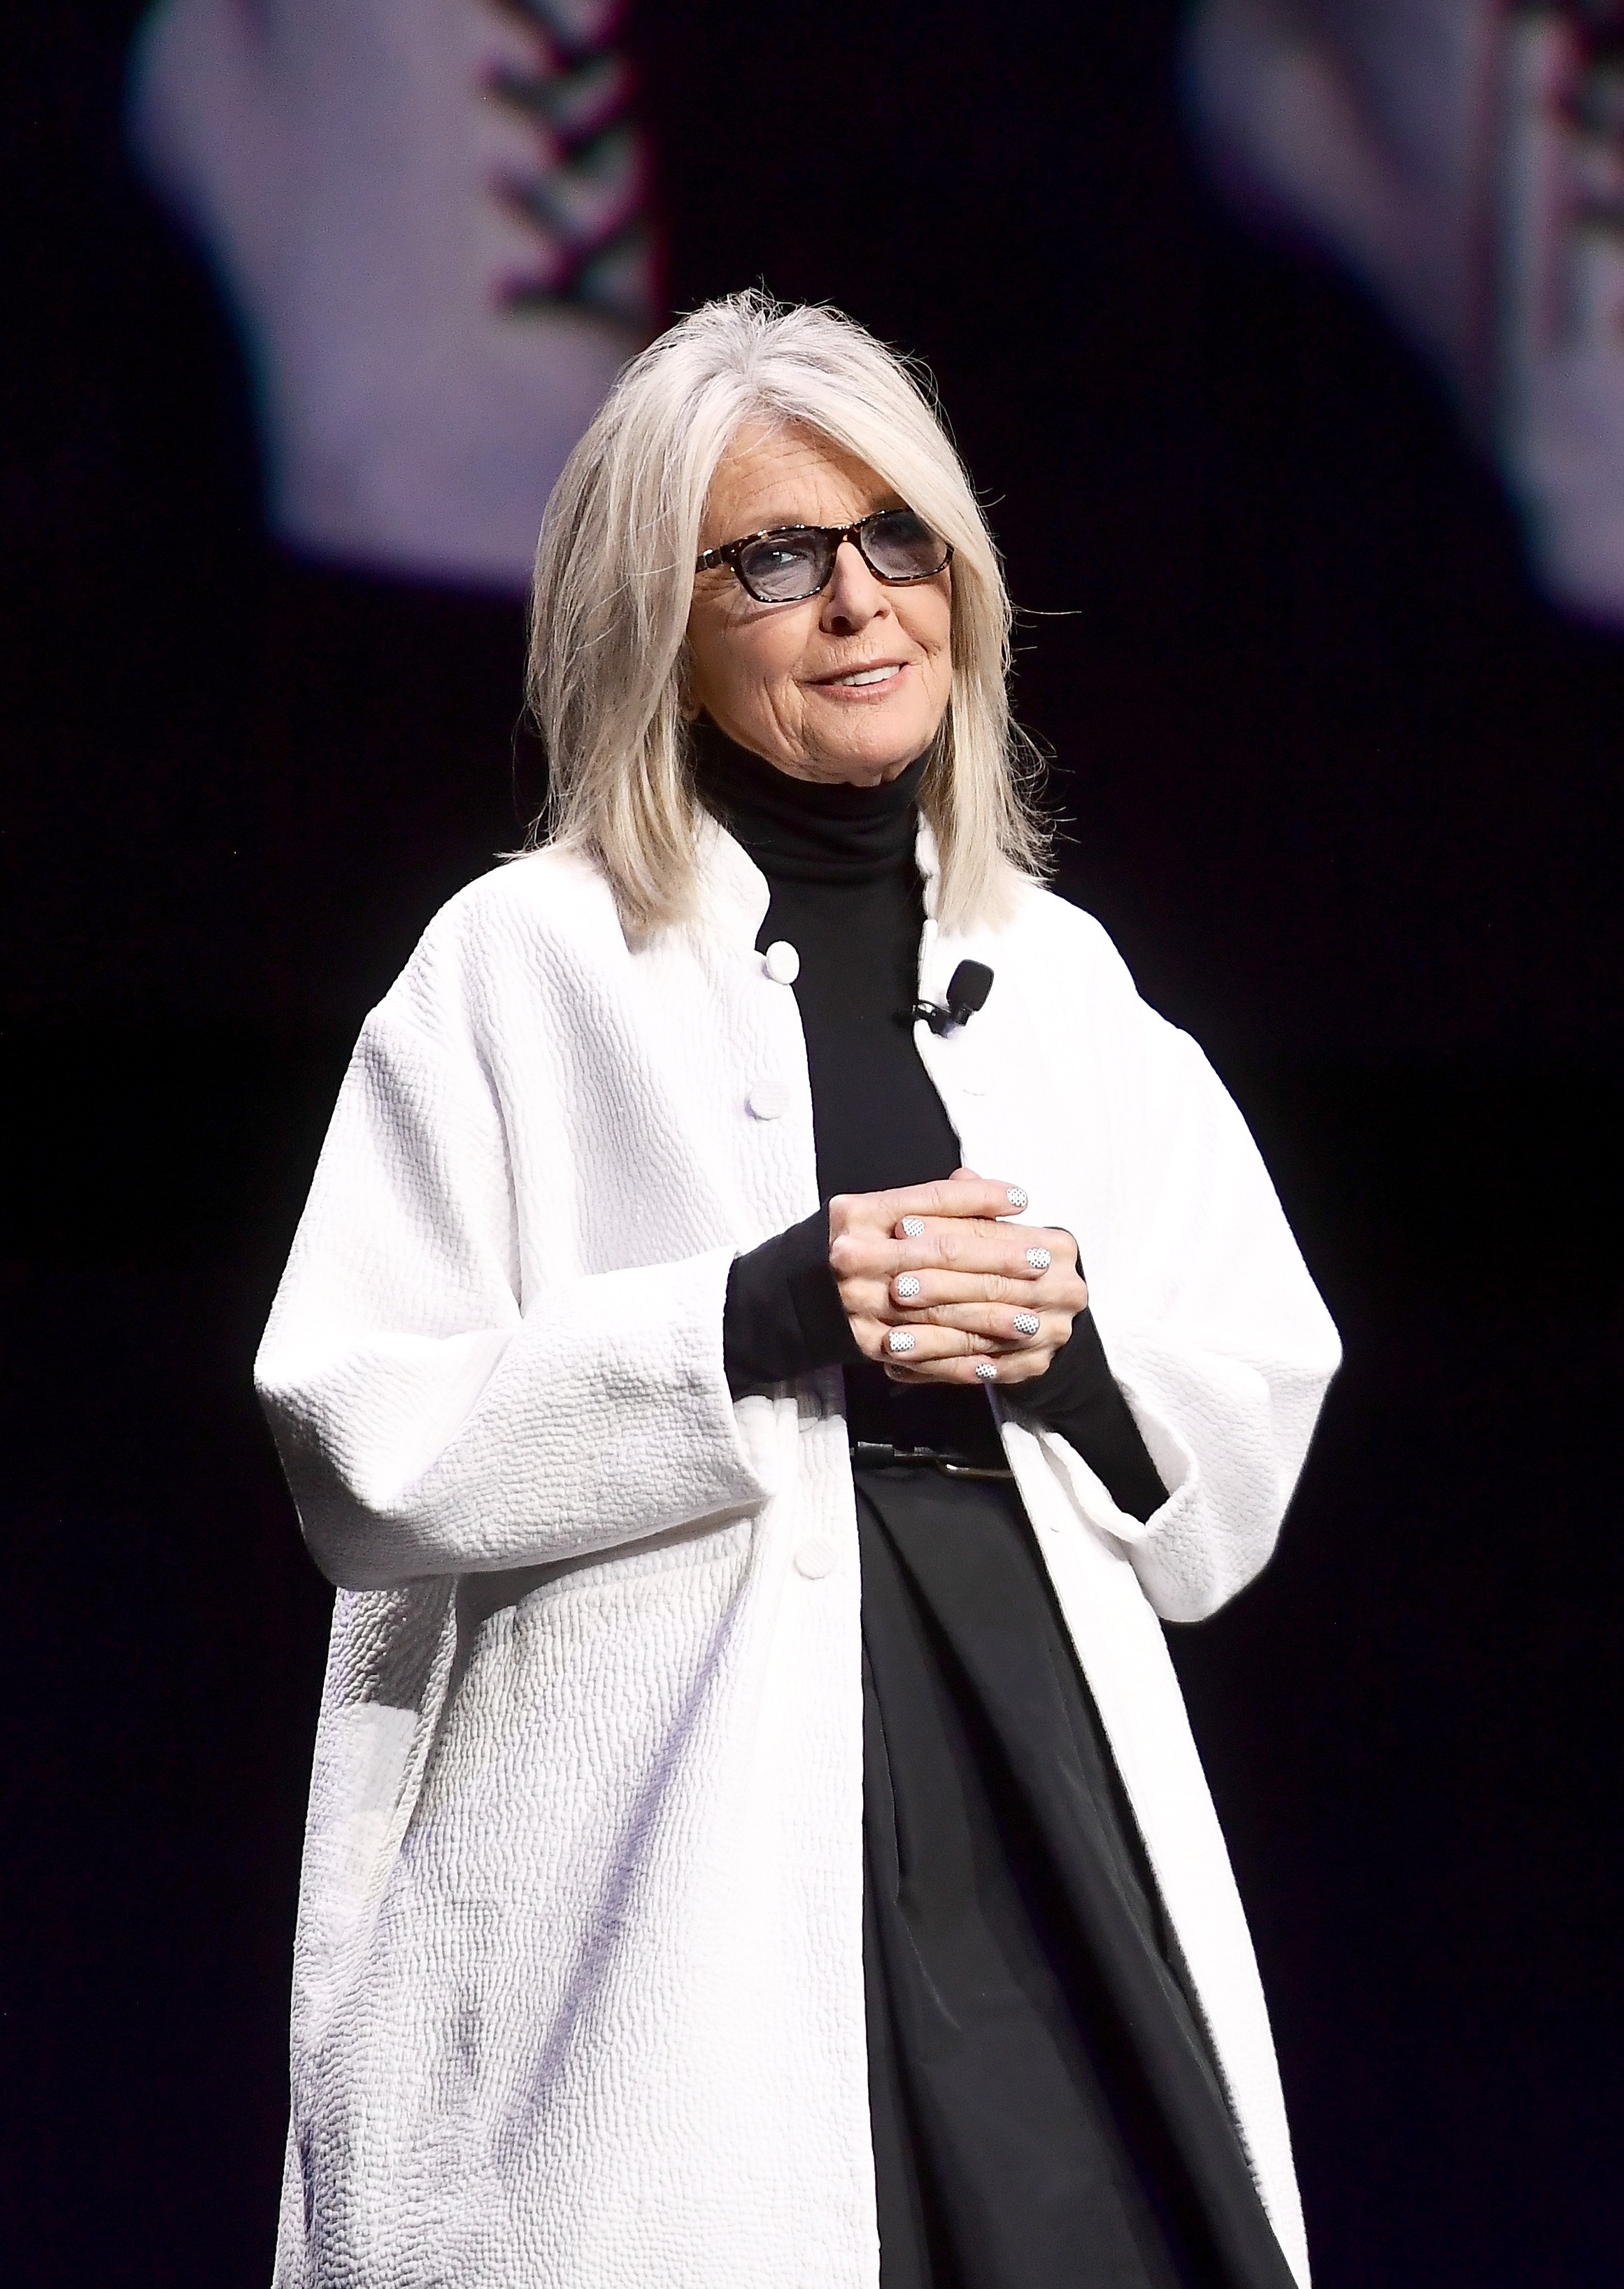 Diane Keaton speaks onstage at CinemaCon 2019 The State of the Industry and STXfilms Presentation at The Colosseum at Caesars Palace on April 2, 2019, in Las Vegas, Nevada. | Source: Getty Images